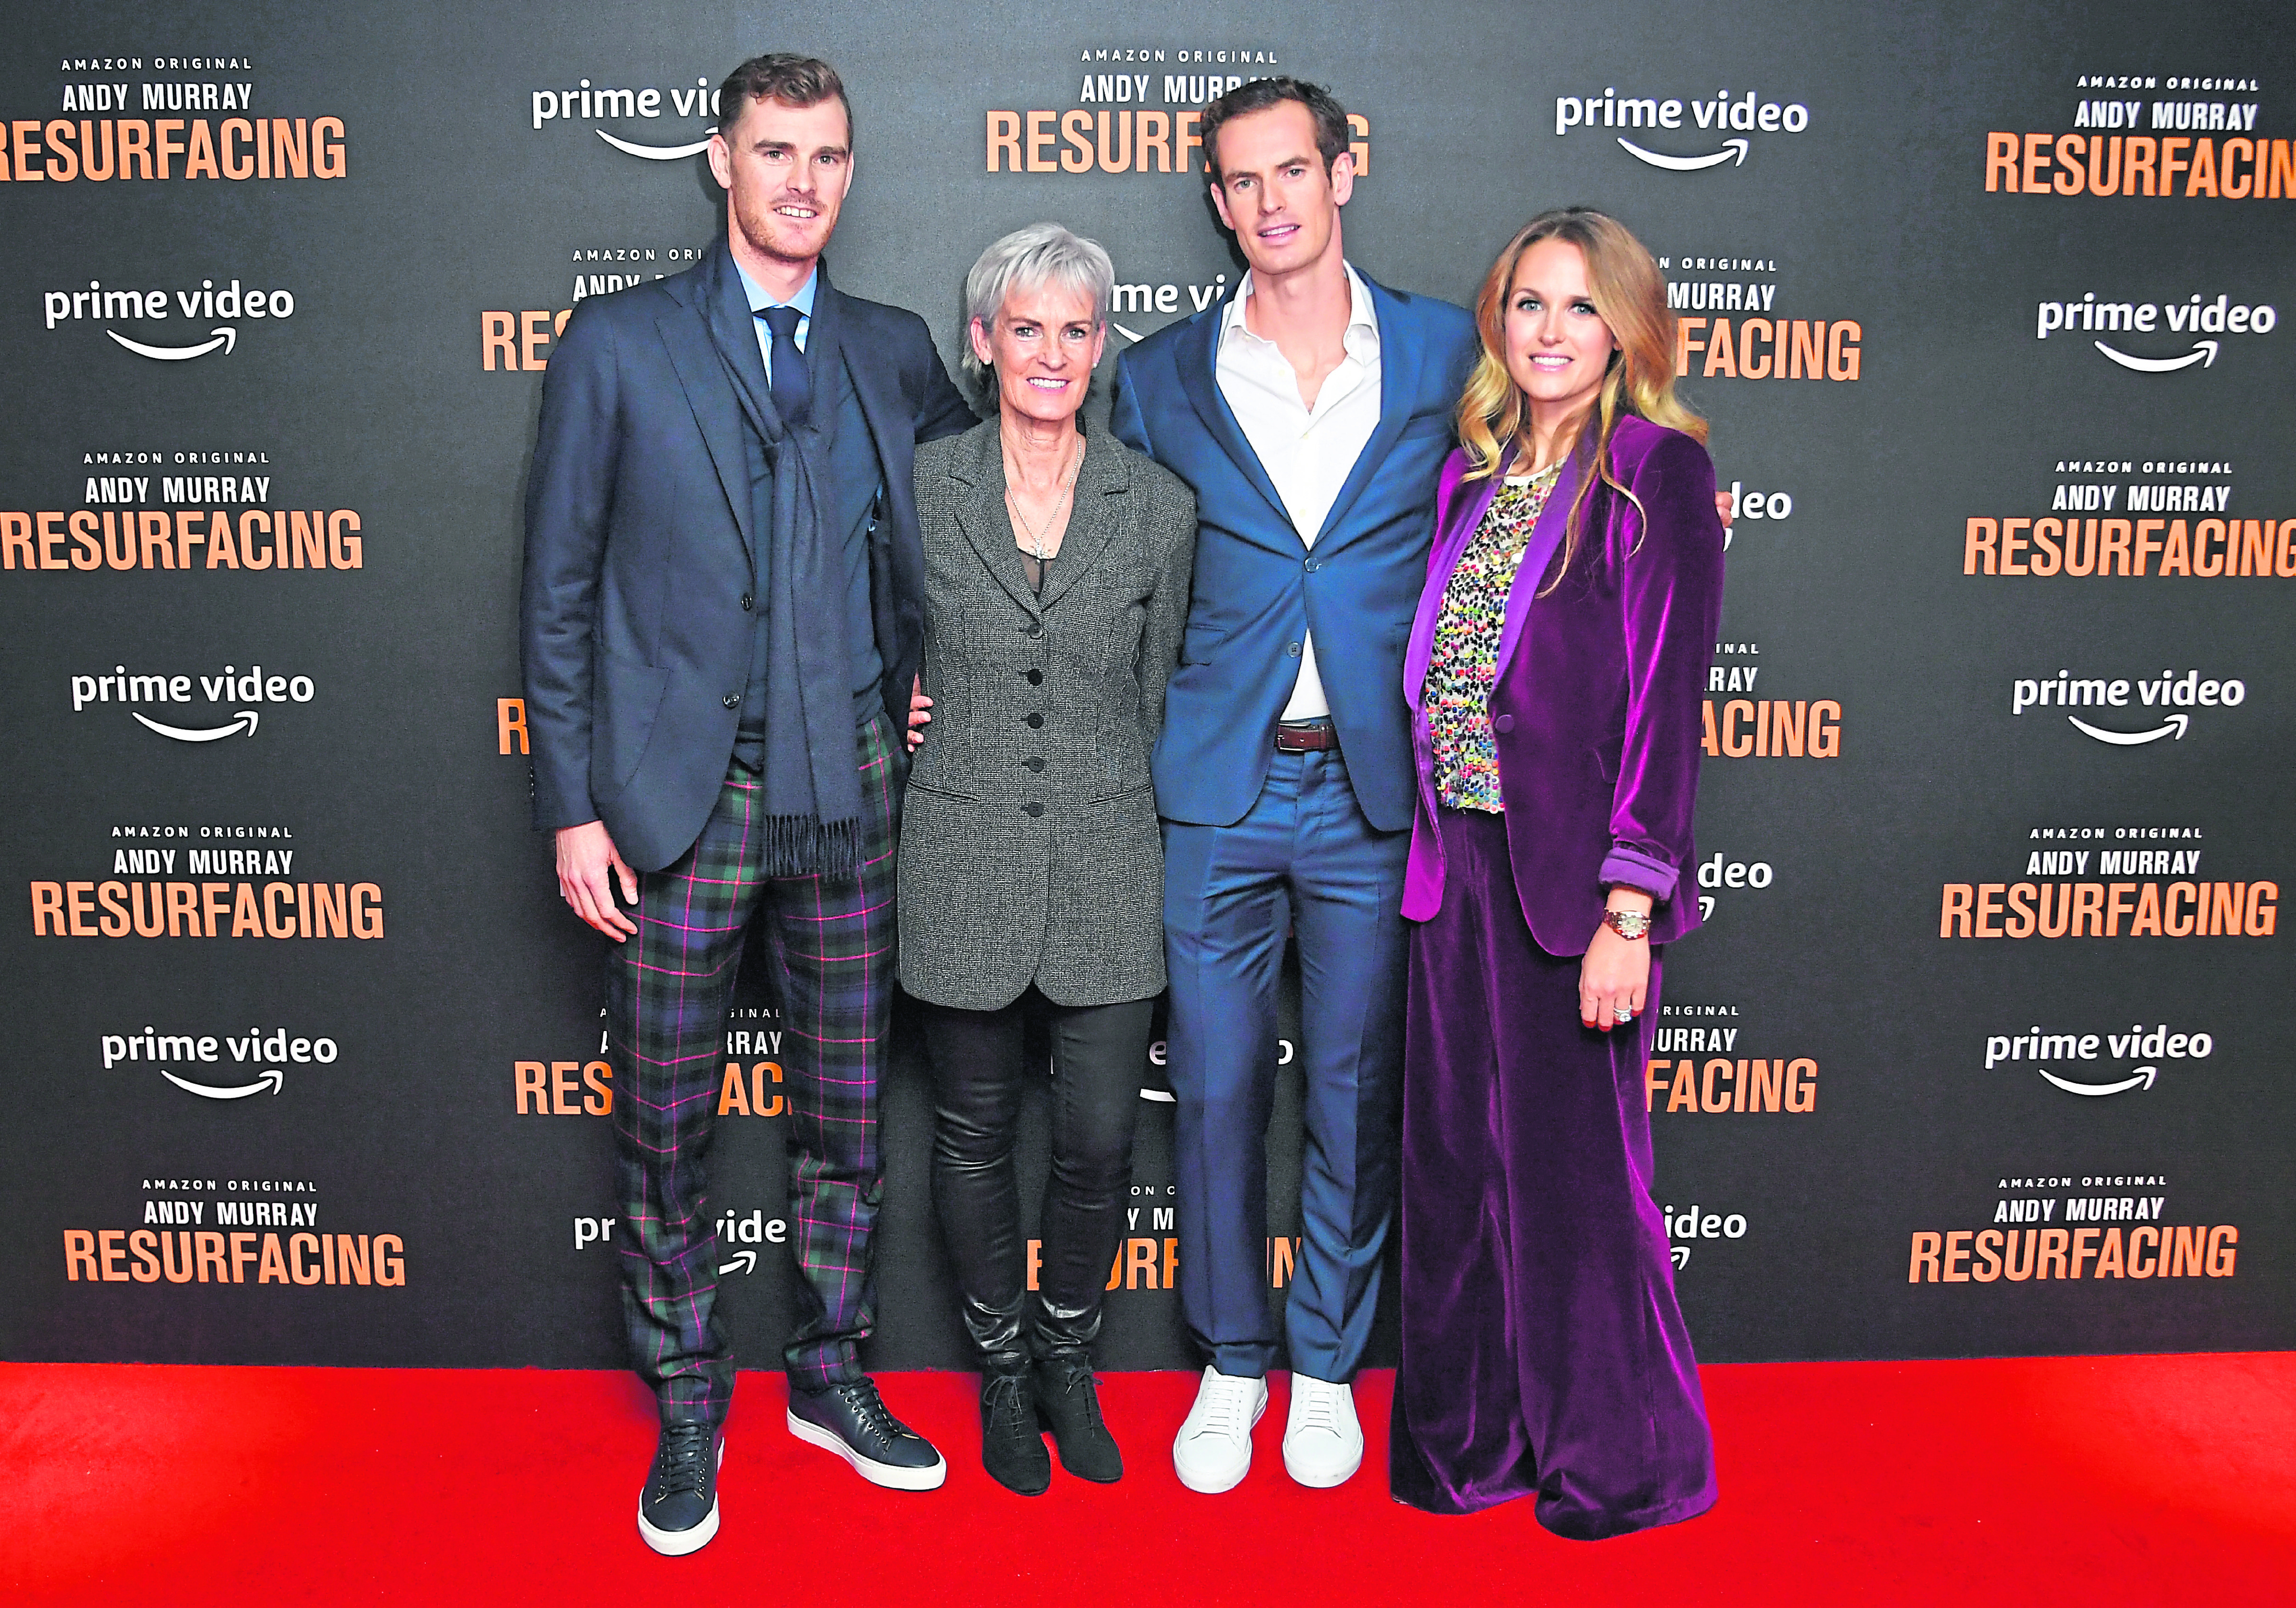 Jamie Murray, Judy Murray, Andy Murray and Kim Sears attend the "Andy Murray: Resurfacing" world premiere at the Curzon Bloomsbury on November 25, 2019.